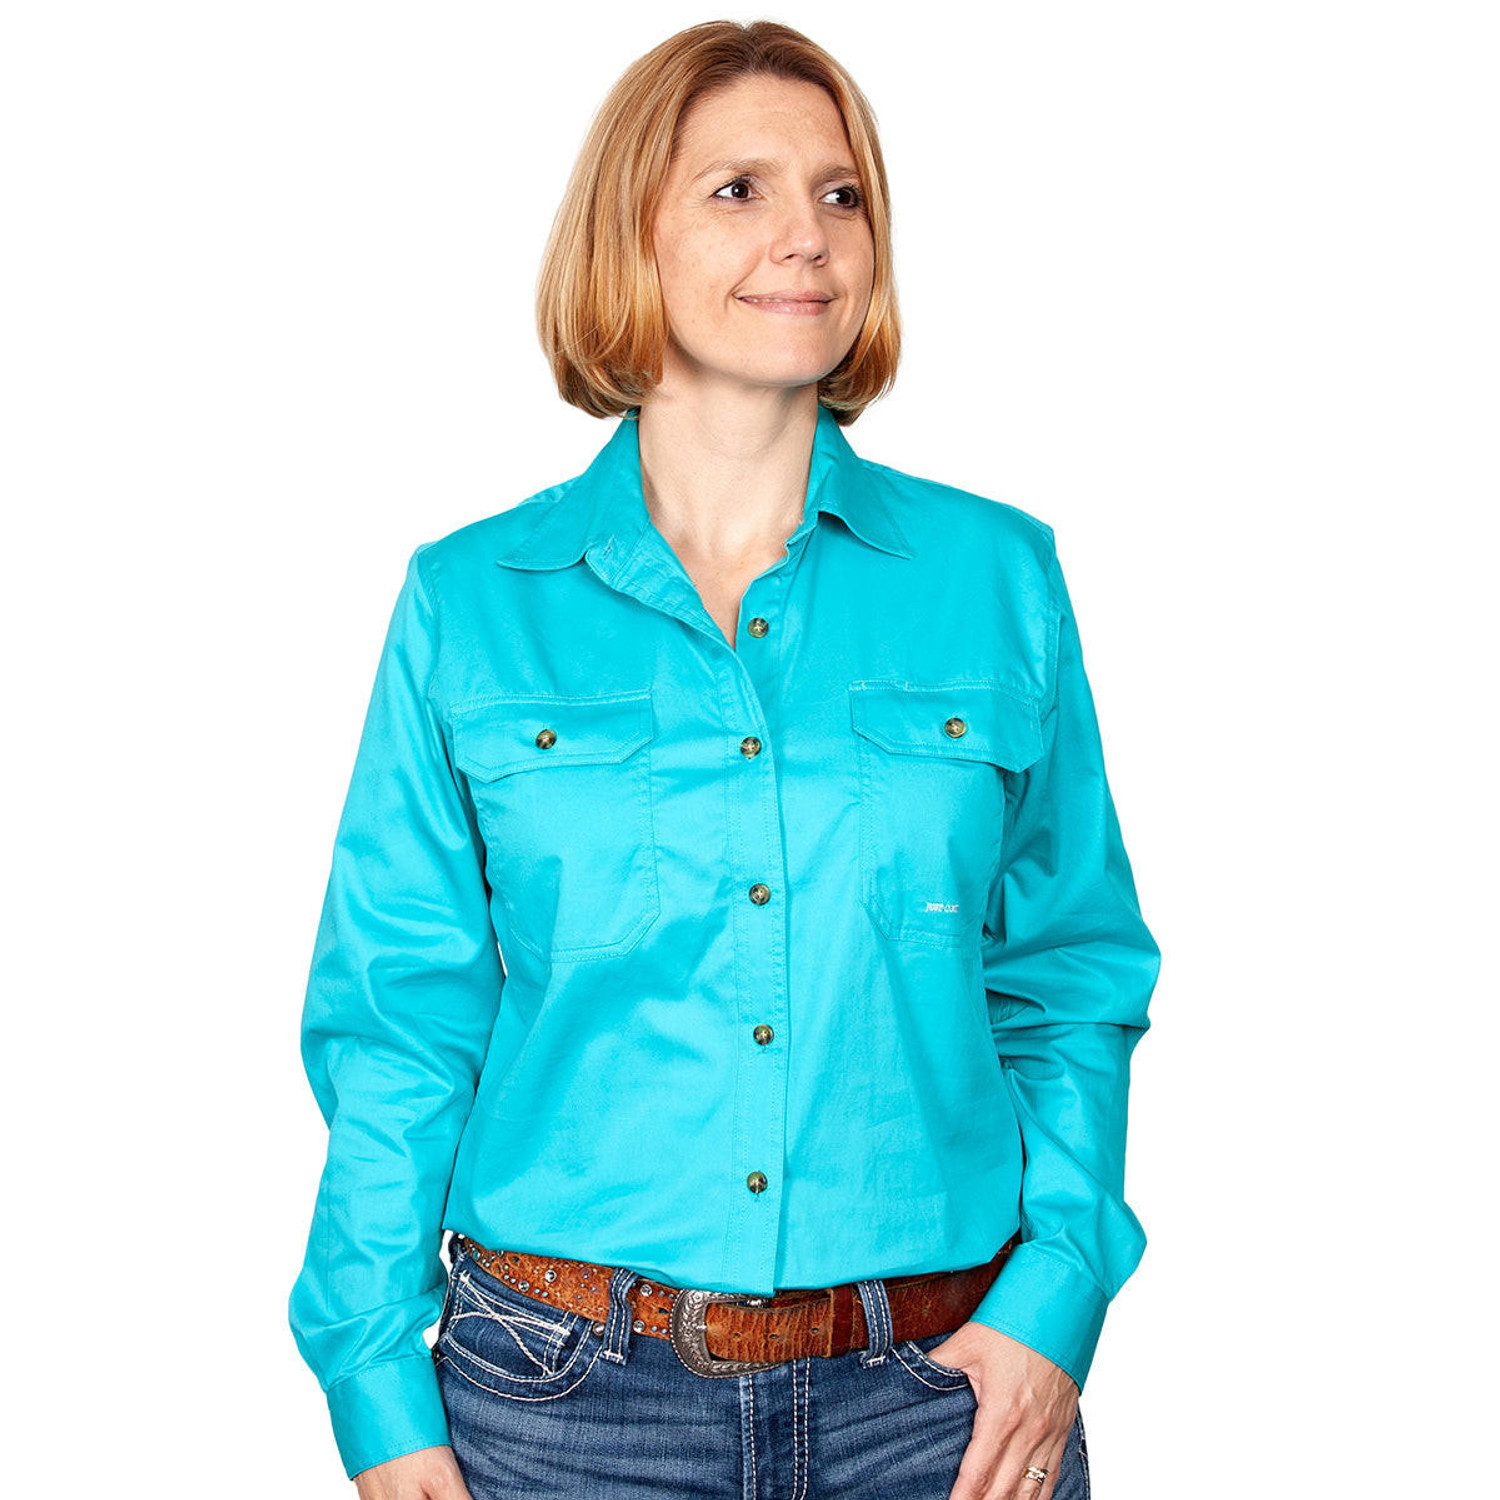 Just Country 50502 Ladies Brooke Longsleeve Open Front Workshirt in Turquoise Bulk Buy Deal, Buy 4 or more Just Country Adults Shirts for dollar44.95 Each